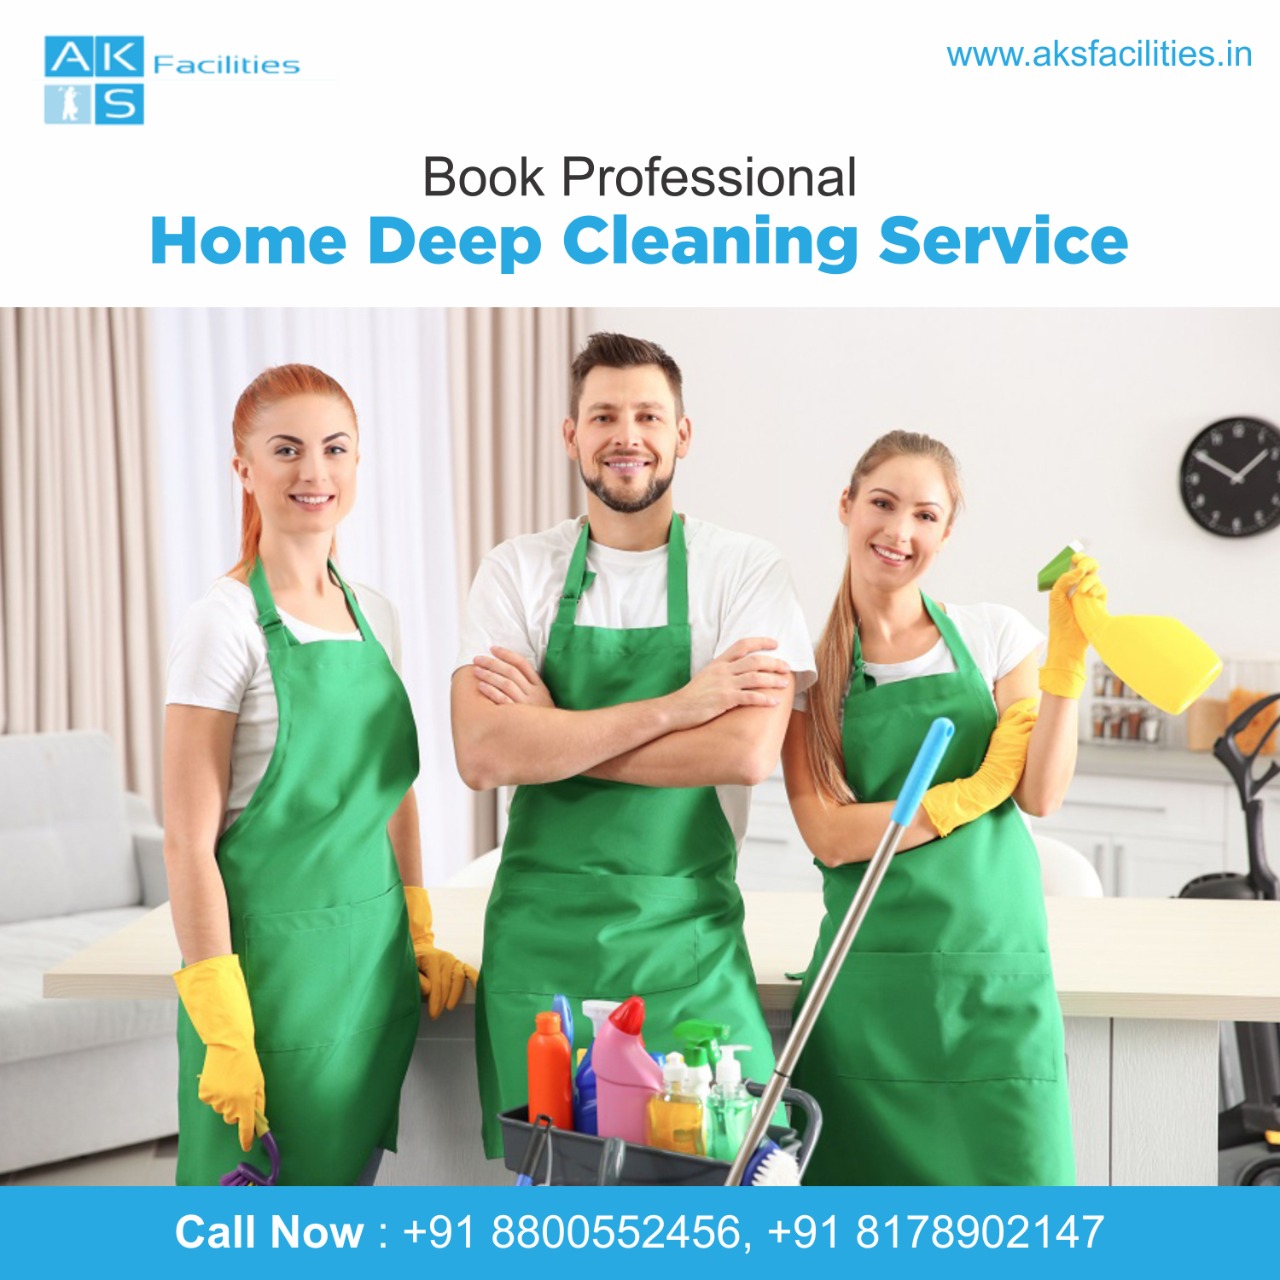 Home deep Cleaning in Gurgaon